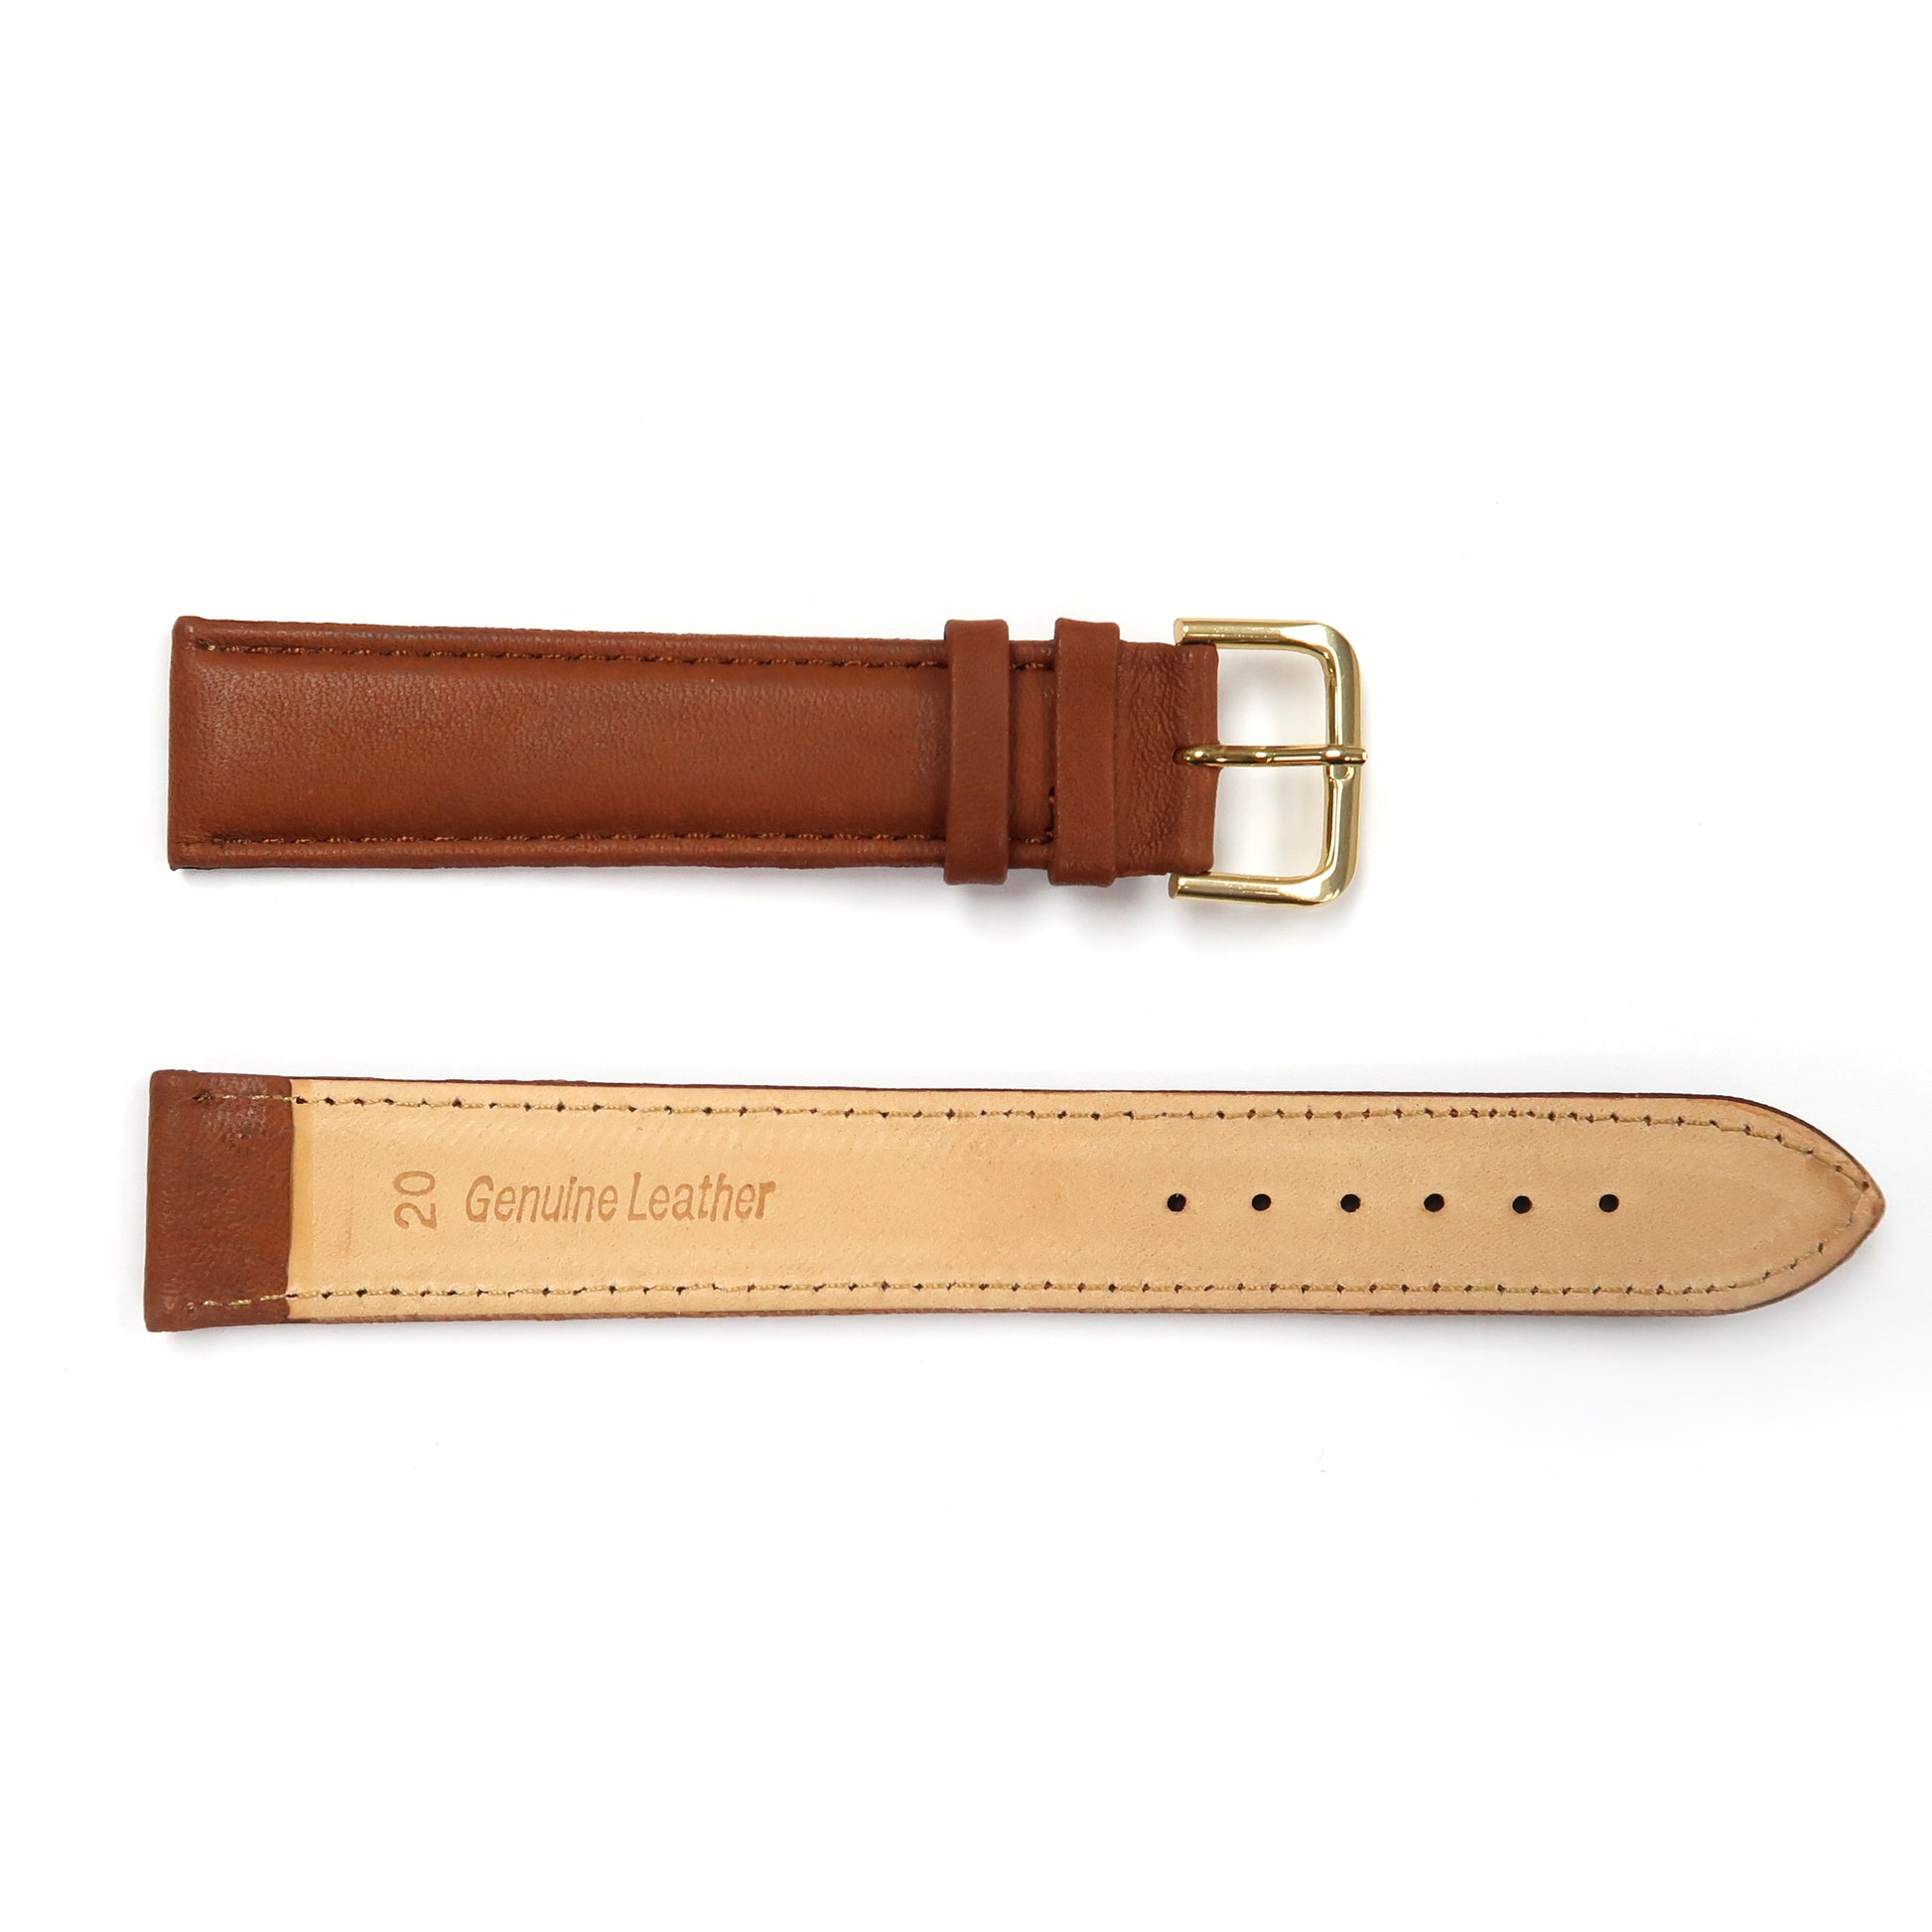 Genuine Leather Watch Band 16-20mm Padded Plain Grain Stitched Band in Brown, Light Brown, Red Extra Long - Universal Jewelers & Watch Tools Inc. 